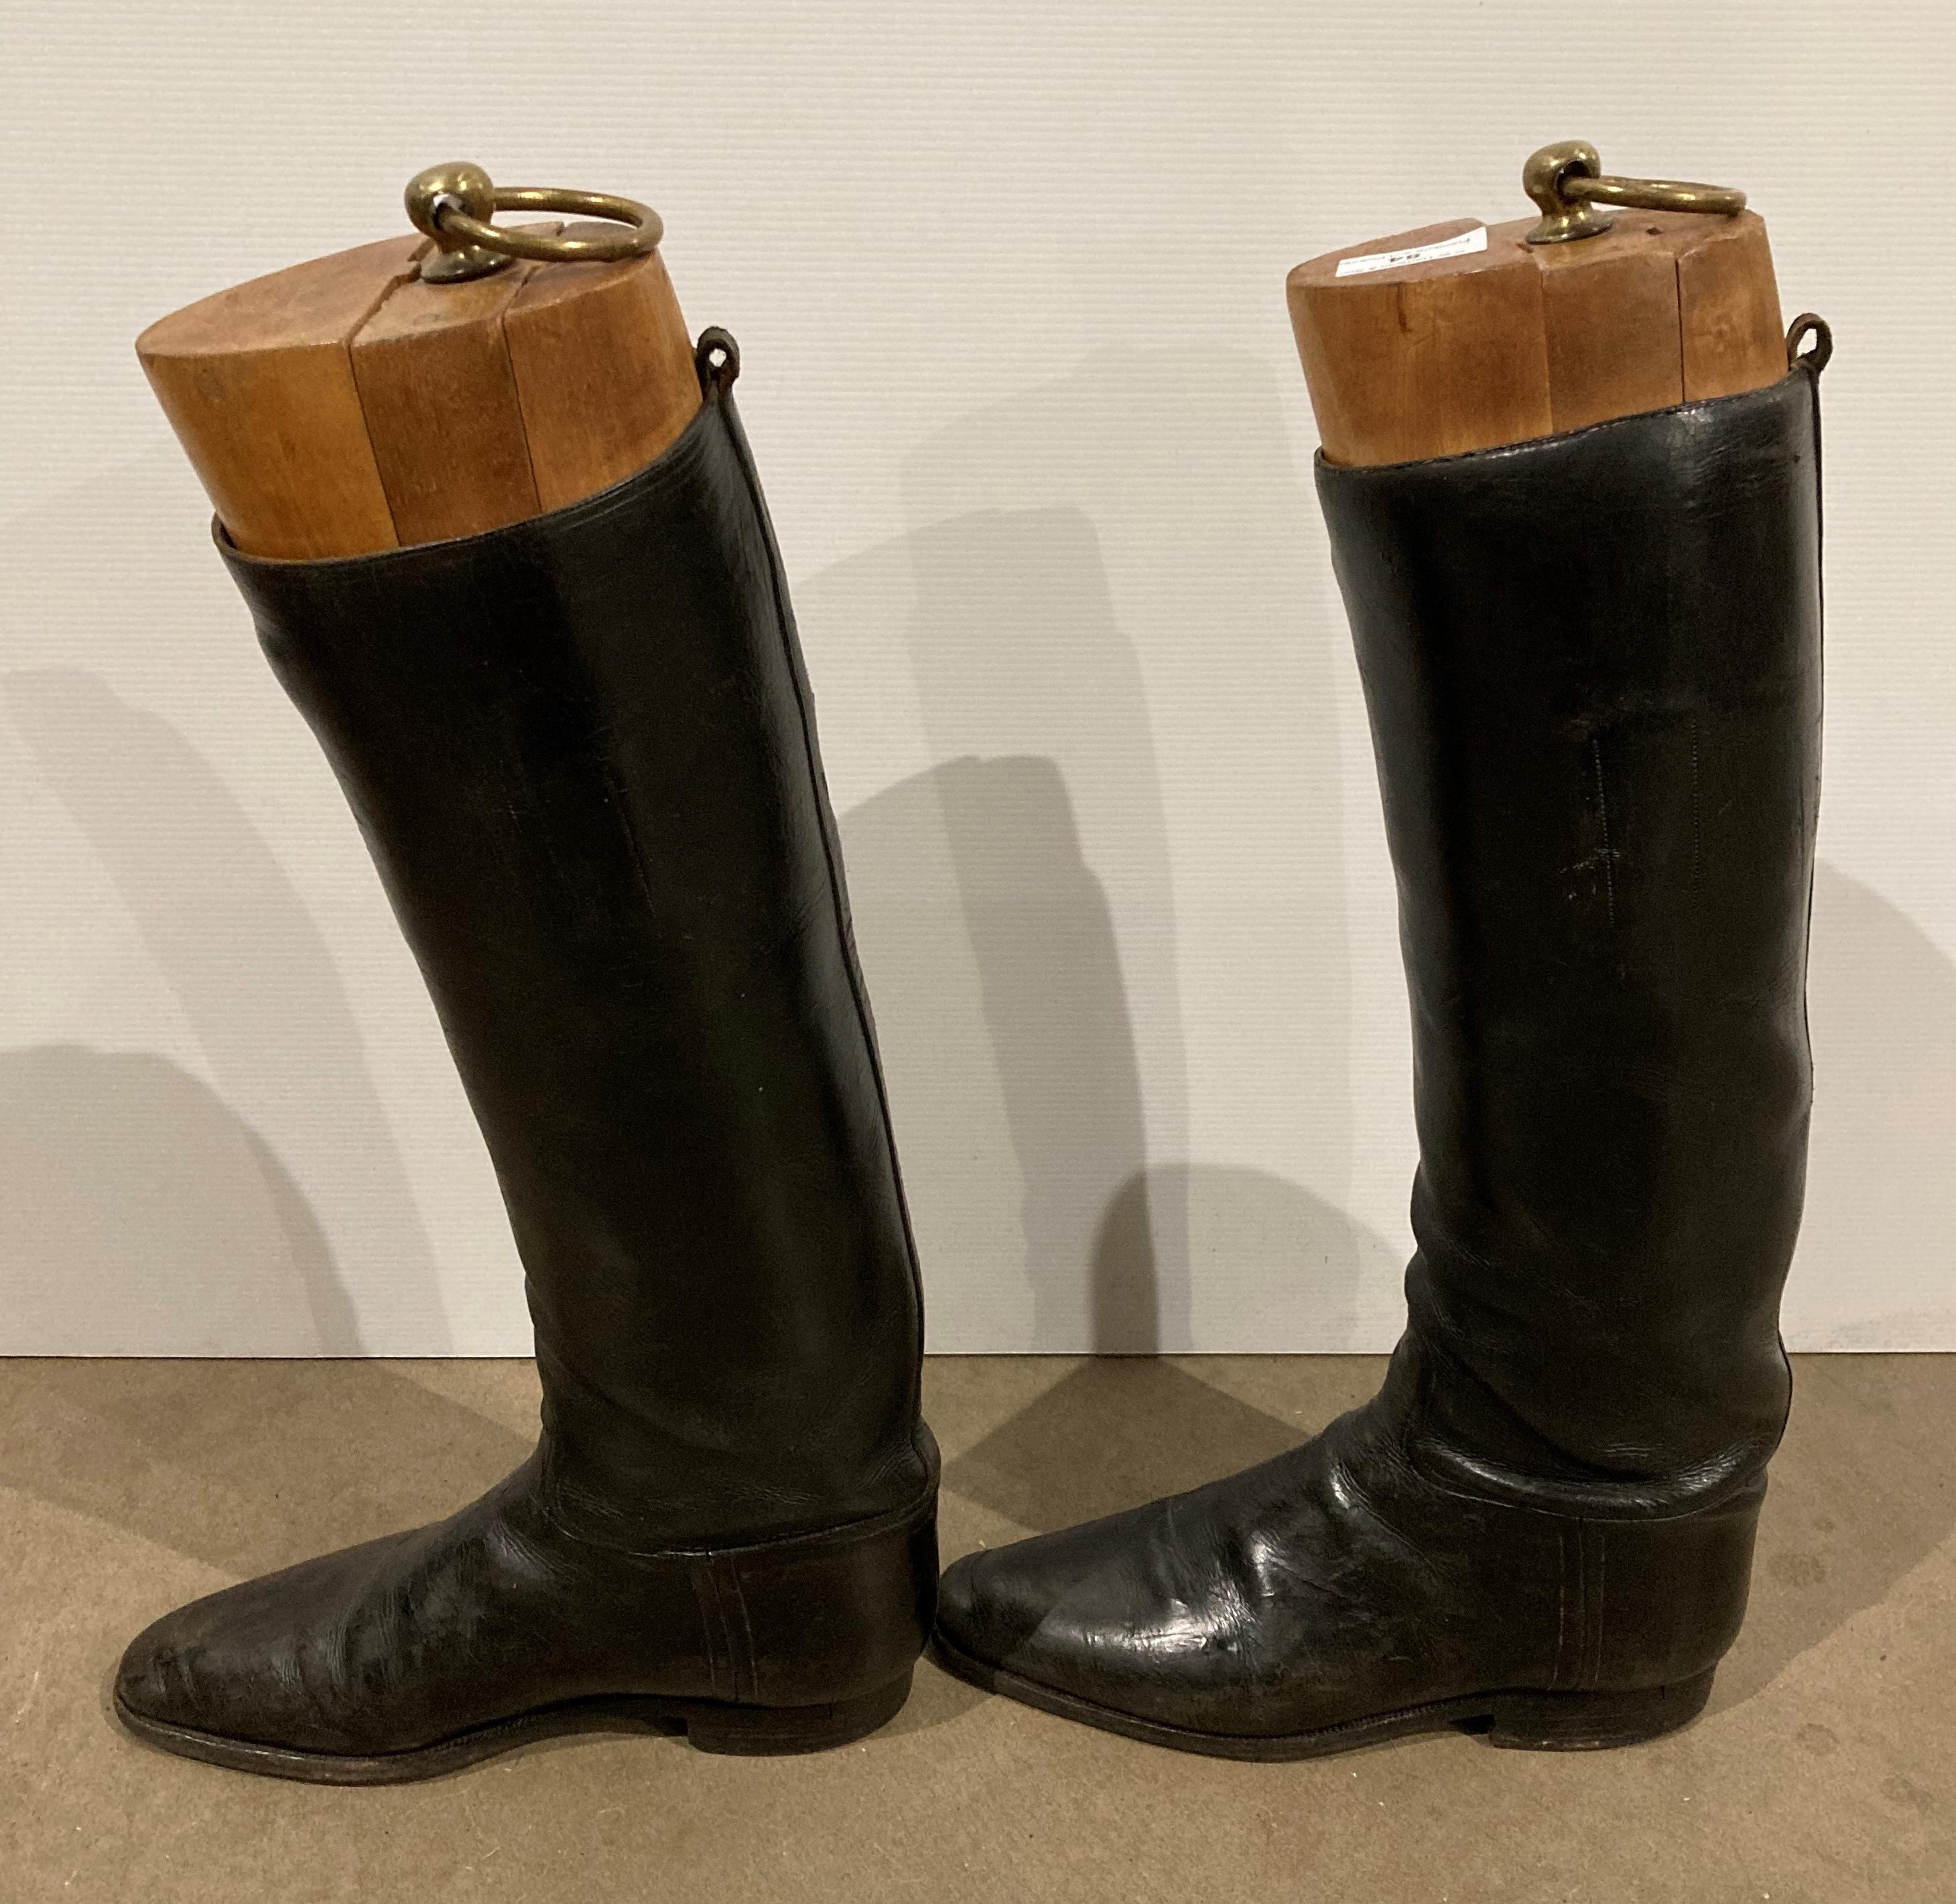 Pair of dark brown leather riding boots (possibly size 6 or 7) and a pair of wooden boot stretchers - Image 2 of 3